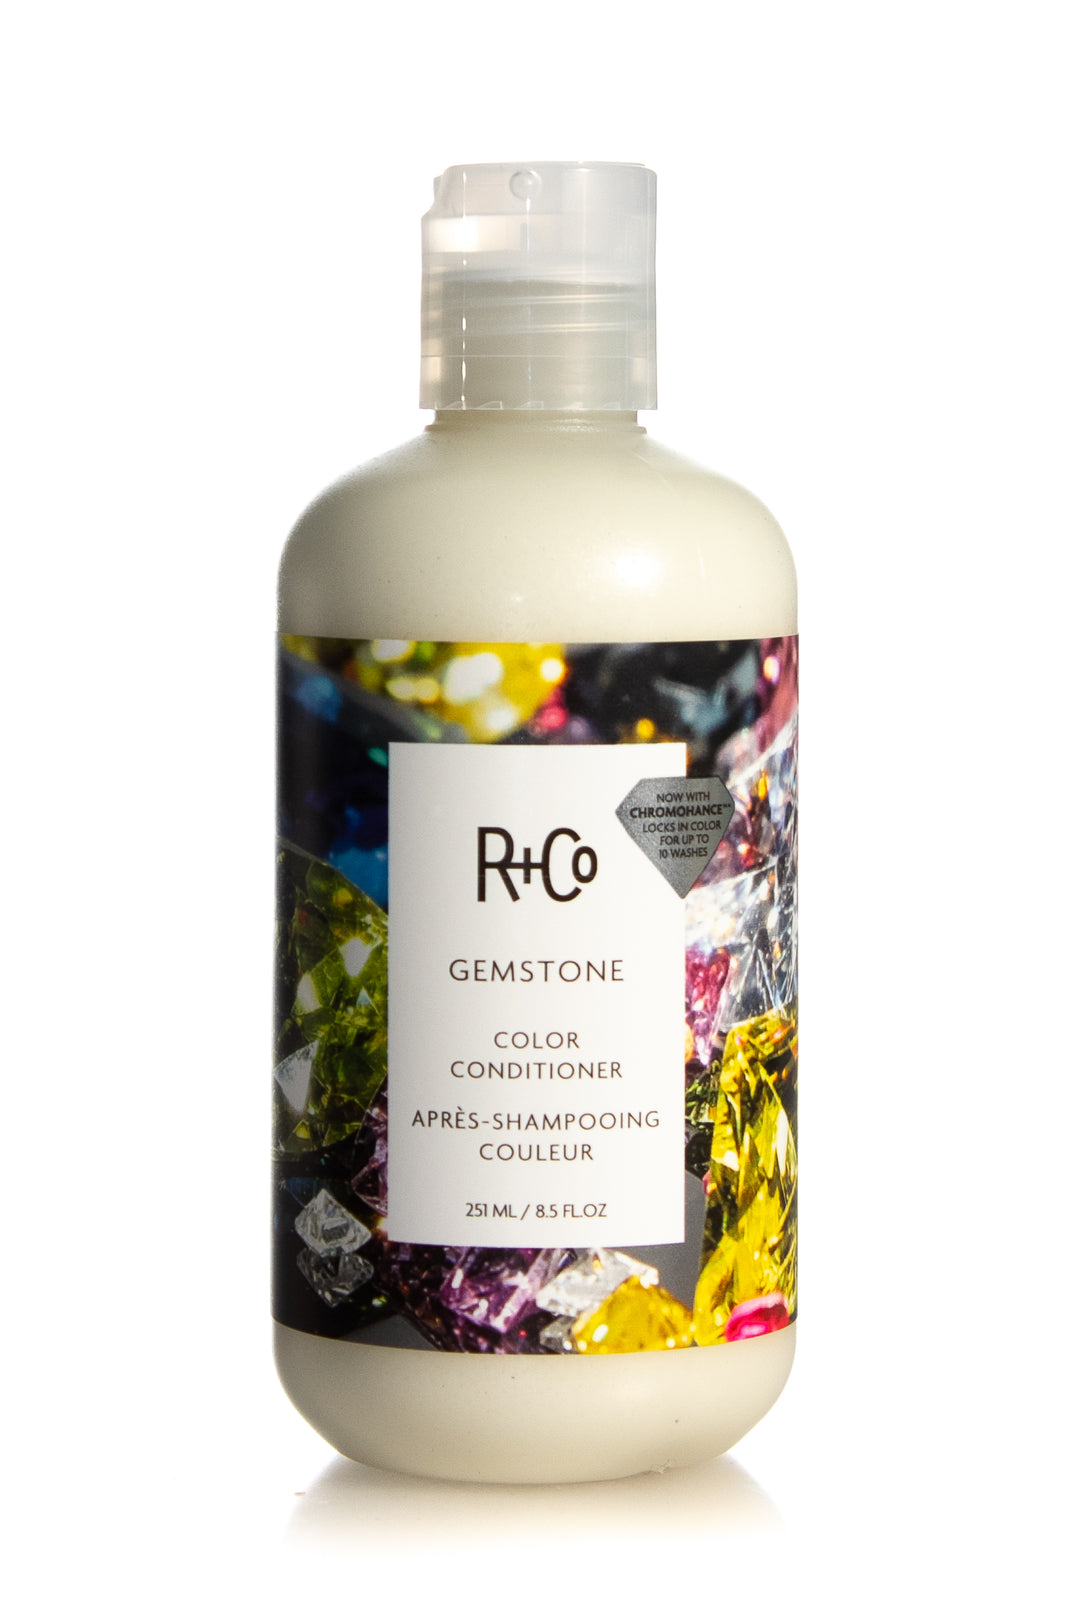 R+Co gemstone conditioner, with an added, color protection complex, this nourishing conditioner is designed to protect and prolong the vibrancy of your shade. It also balances the scalp, tames frizz and seals split ends.